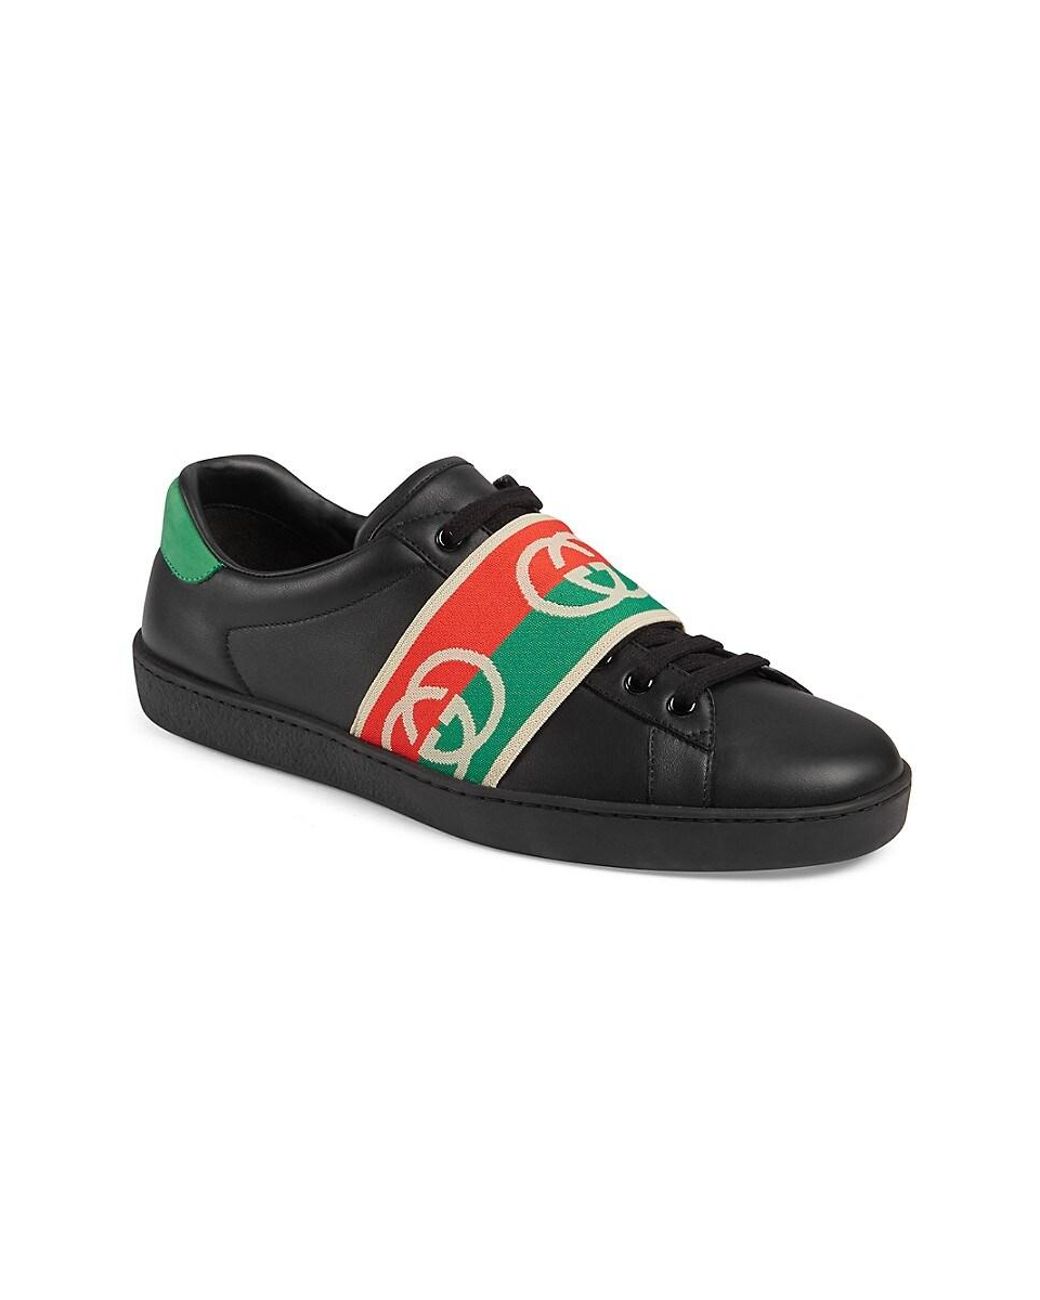 Gucci Leather New Ace Sneakers in Nero (Black) for Men - Save 6% - Lyst